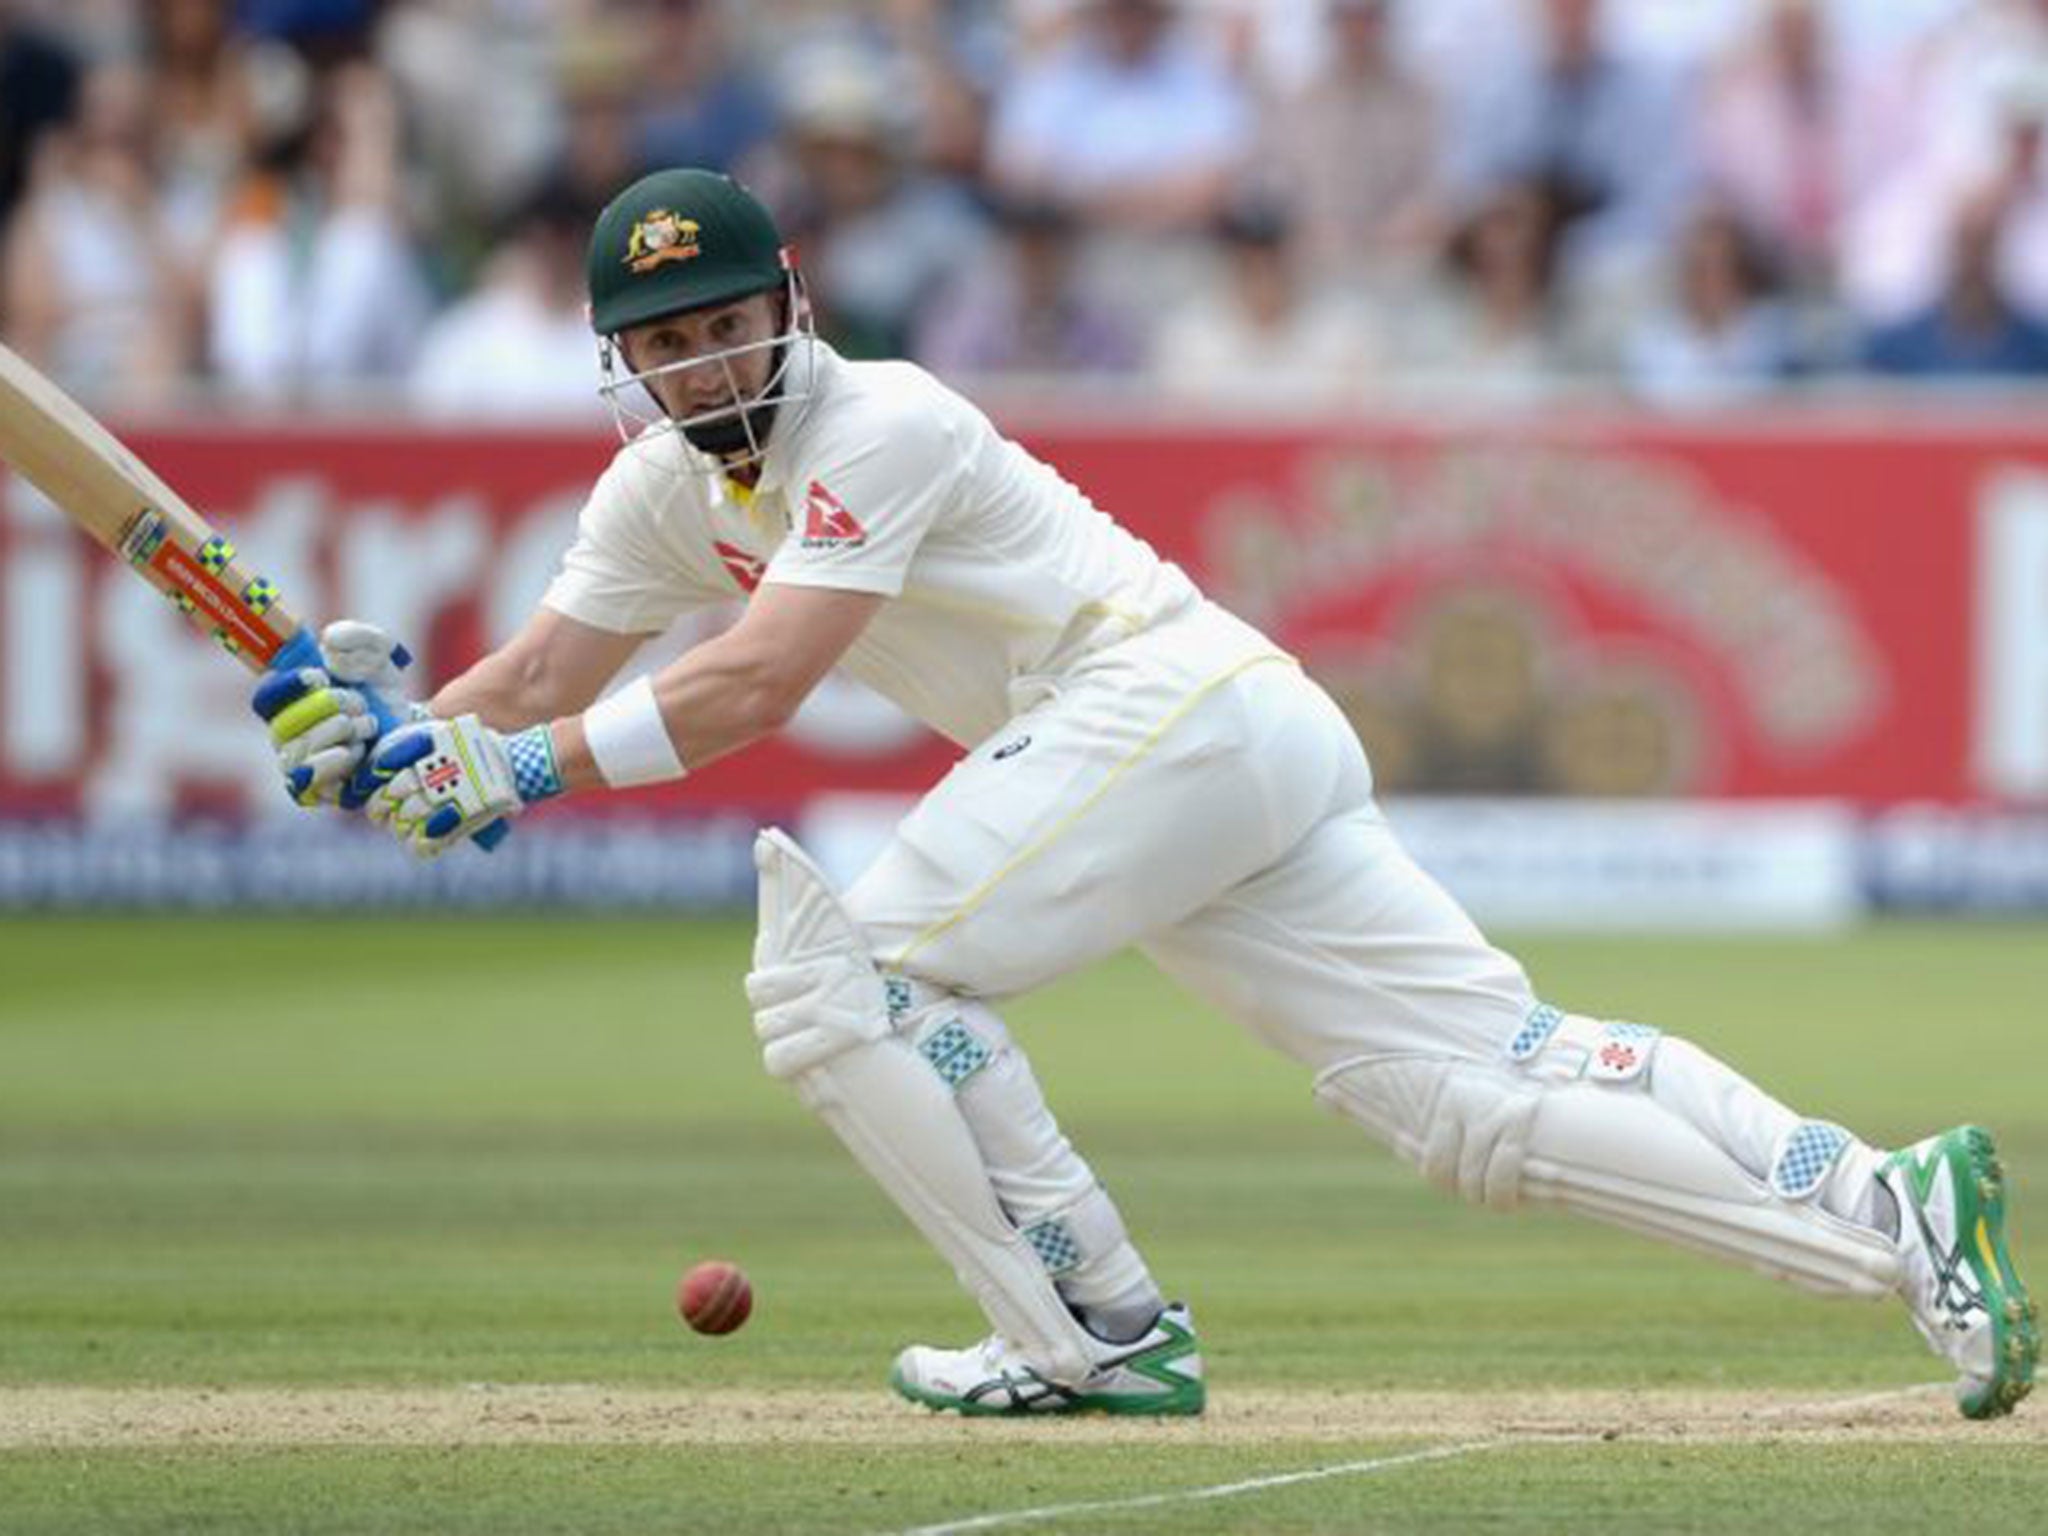 Peter Nevill of Australia bats during day two of the 2nd Investec Ashes Test match between England and Australia at Lord's Cricket Ground on July 17, 2015